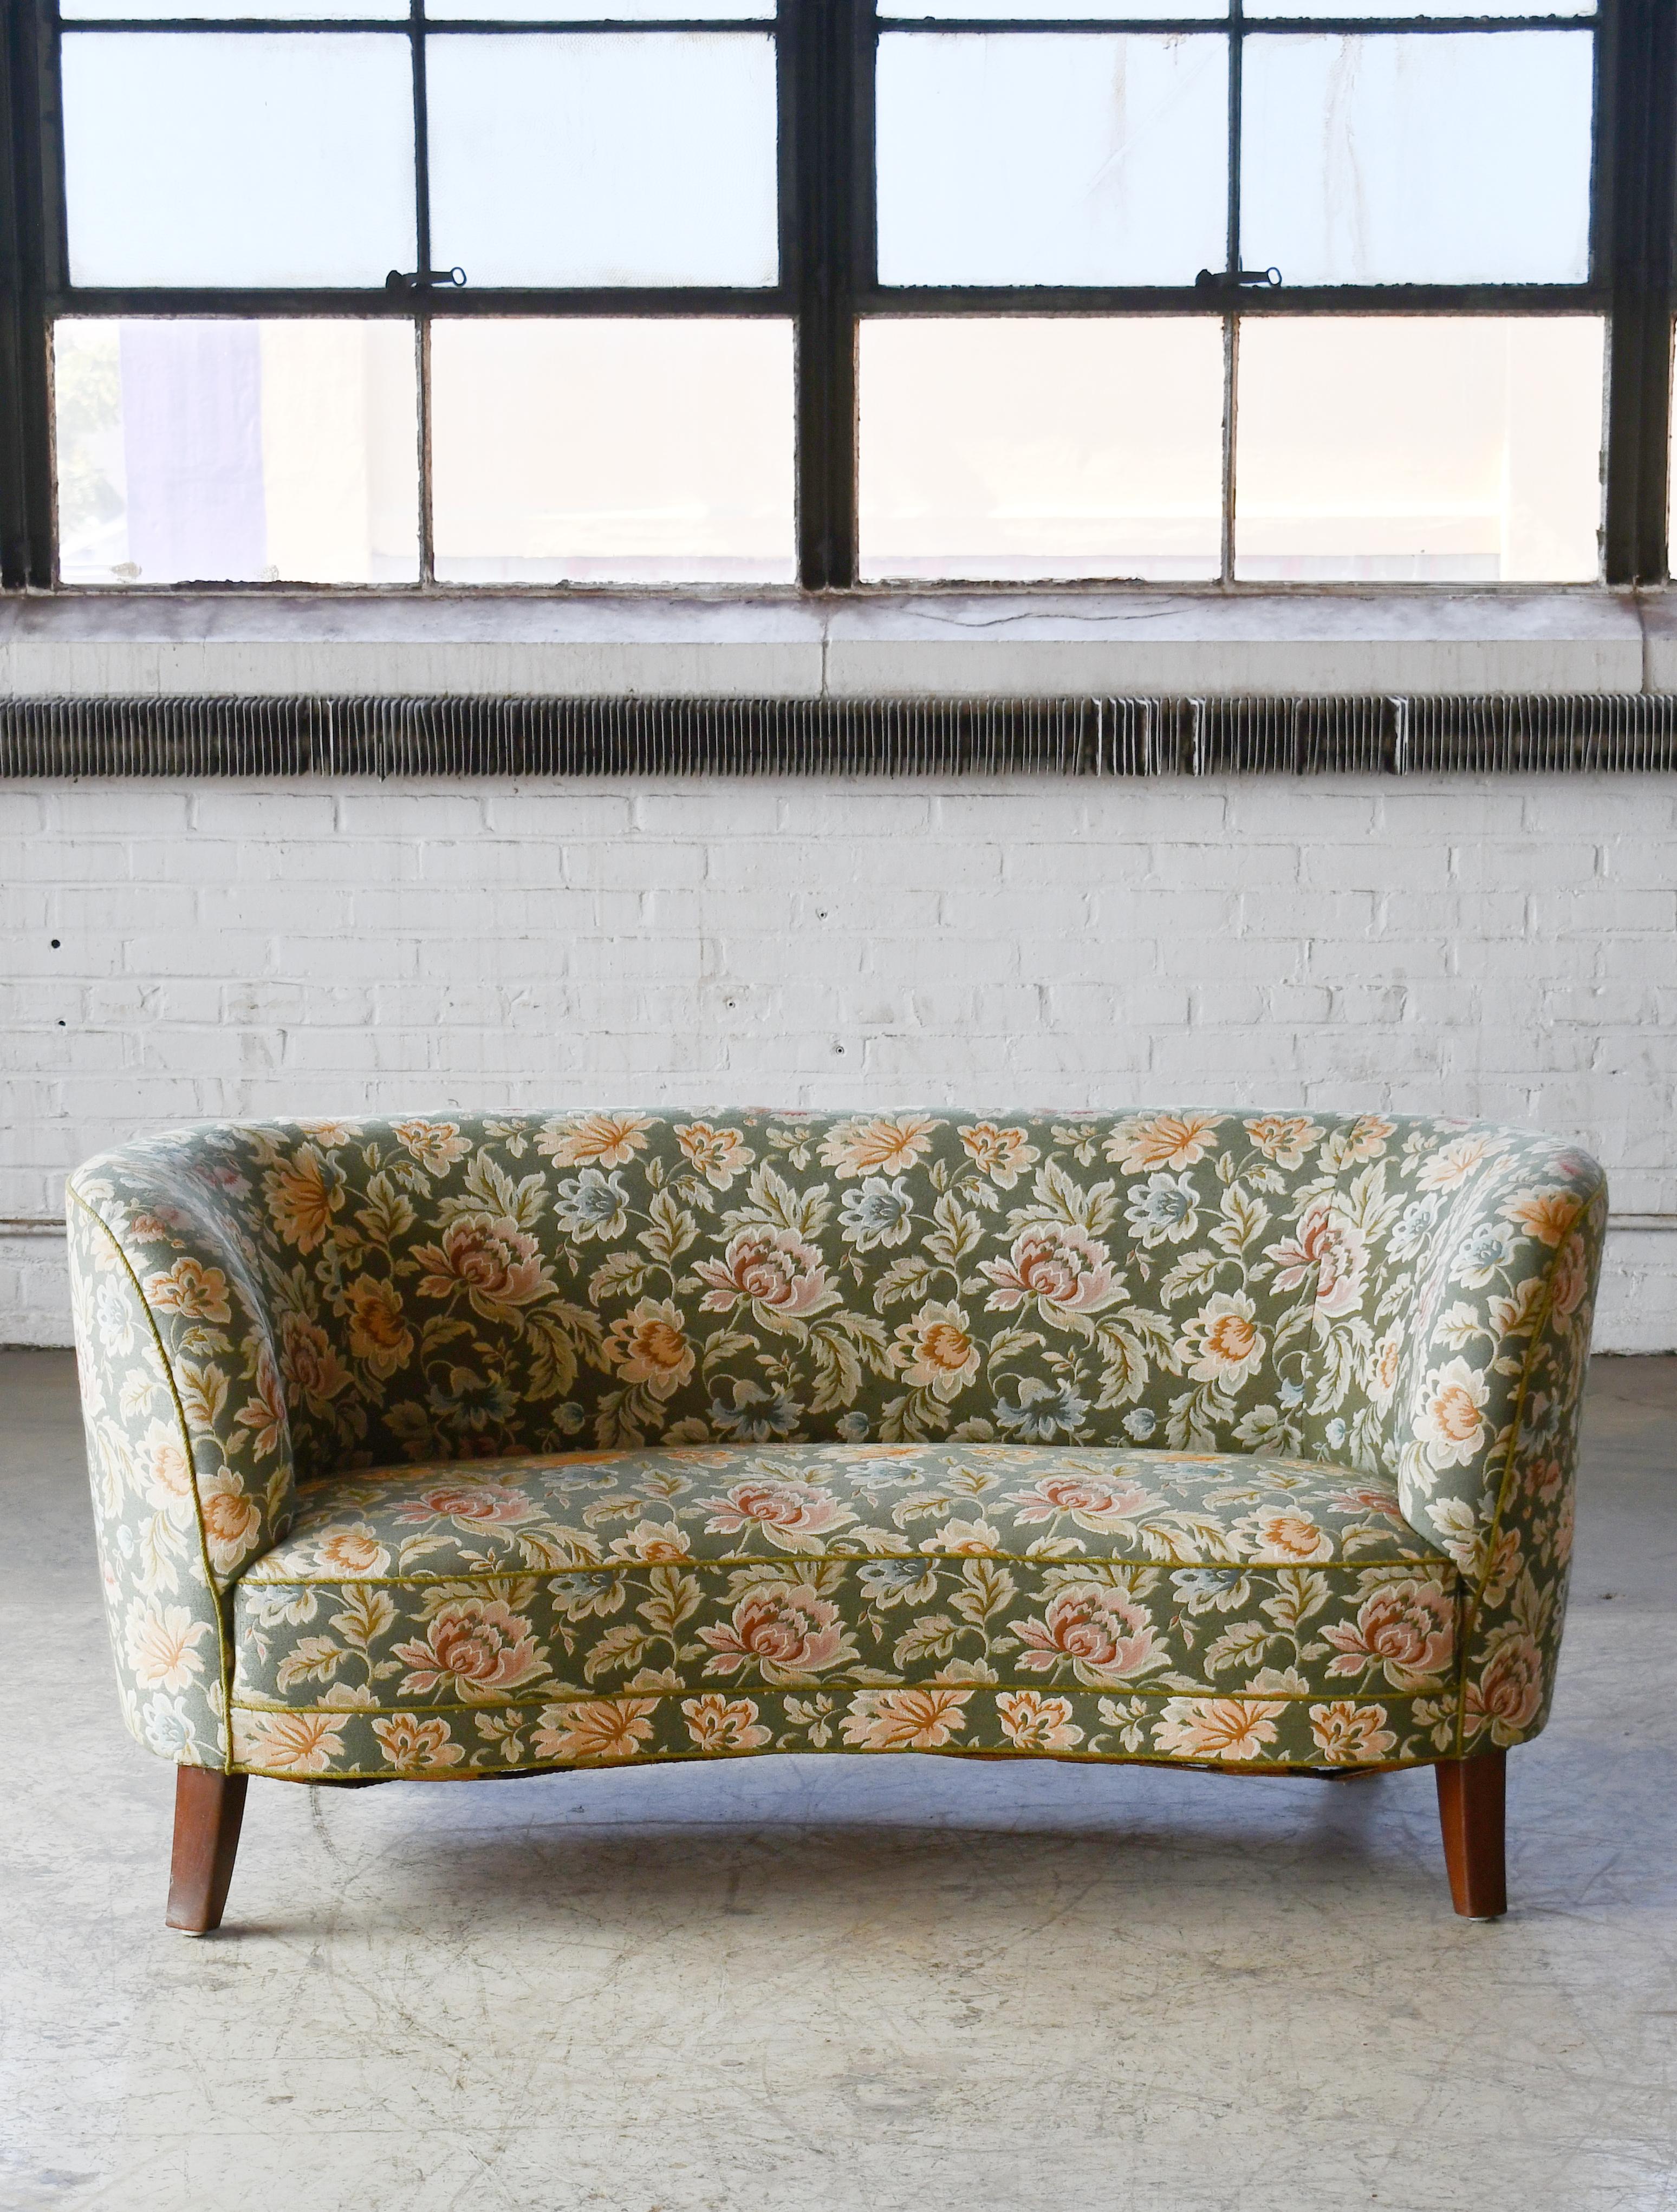 Banana shaped or curved loveseat made in Denmark, around early 1950s. This small sofa will make a strong statement in any room. Beautiful round voluptuous lines and tall legs. These sofas were typically made up through the 1930s to early 1950s and